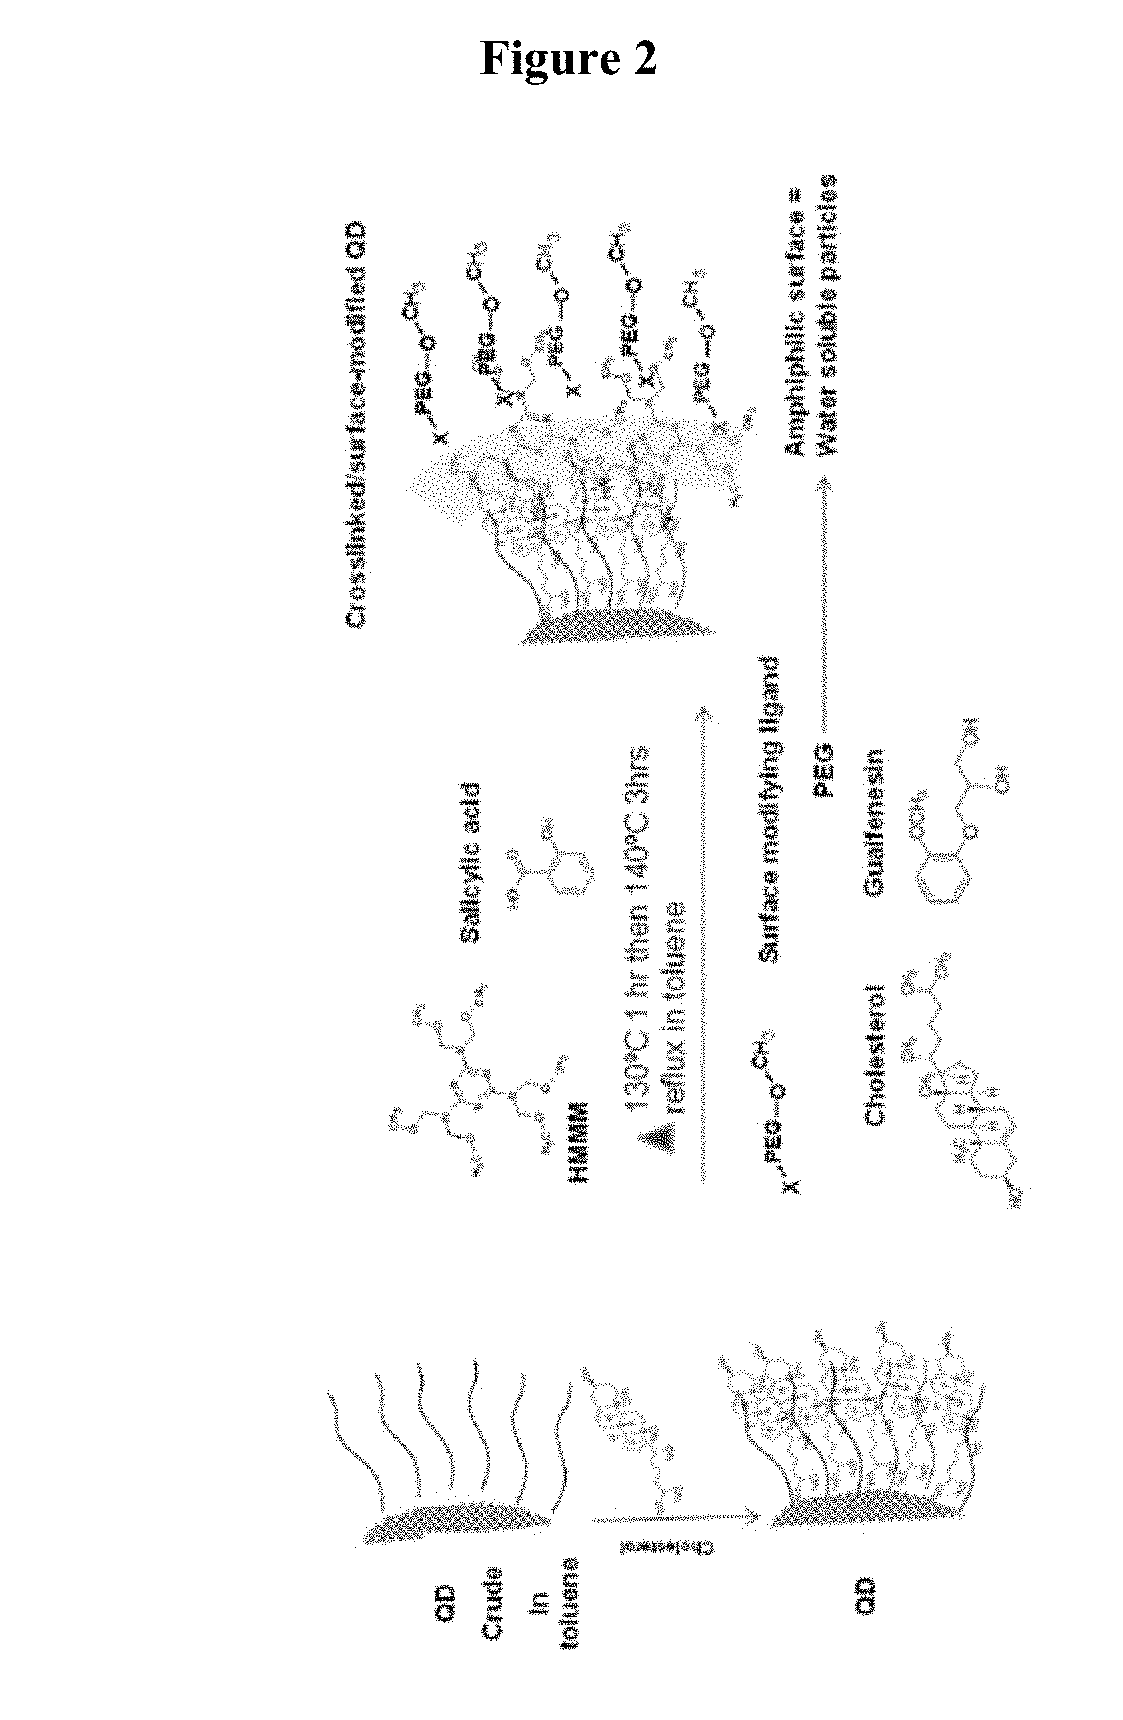 Ligand conjugated quantum dot nanoparticles and methods of detecting DNA methylation using same